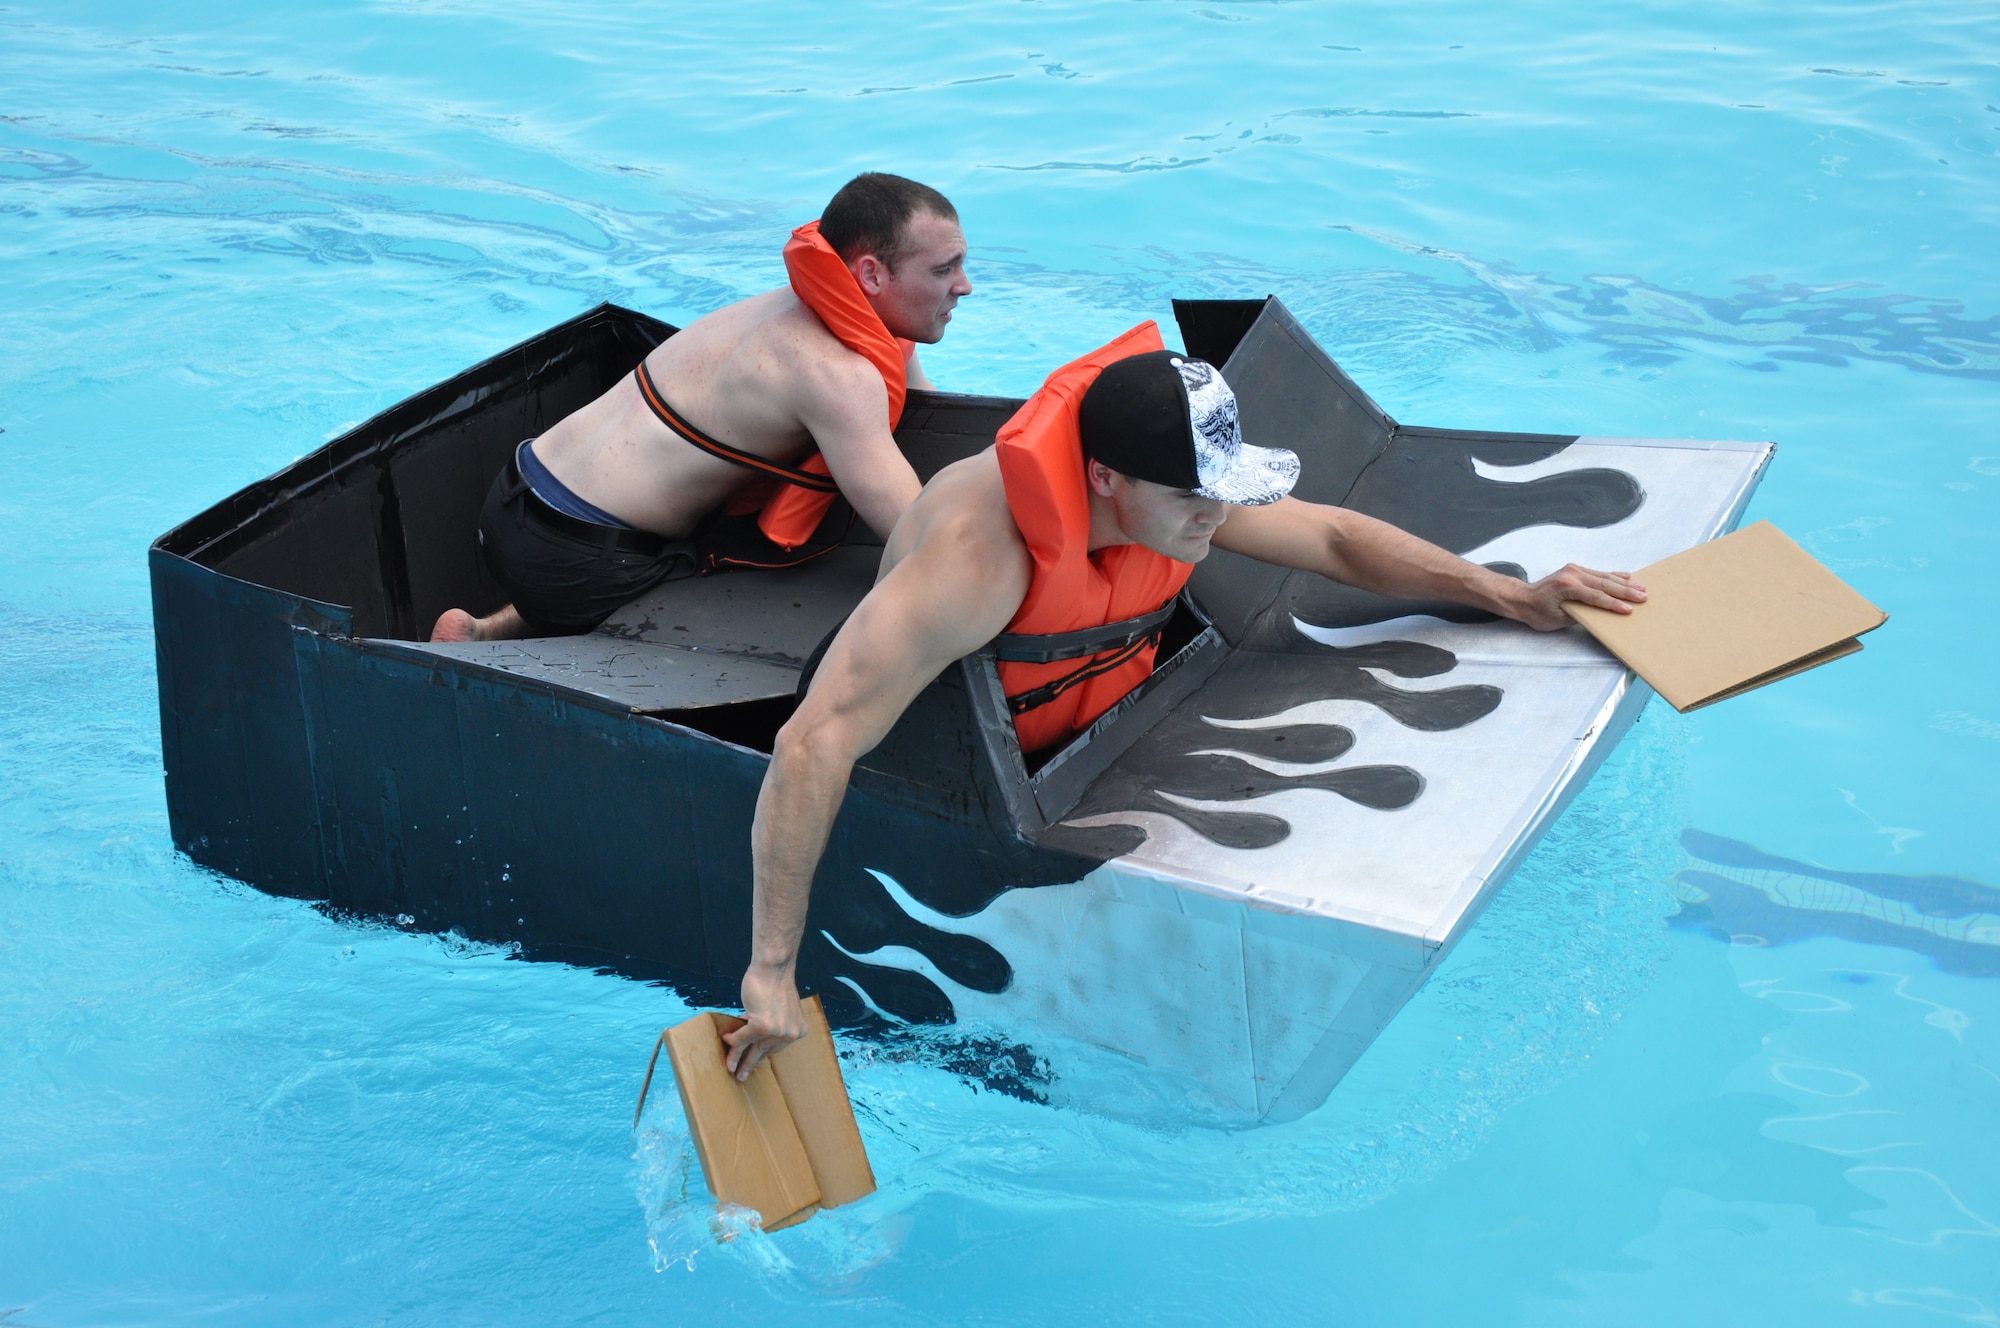 Jimmy Salinas, right, and Joshua Graver, of team Mid Checkers, paddle their way down the Gerrity Pool lane July 31 during the 10th Annual Cardboard Regatta. Team Mid Checkers had the fastest time and best boat, the USS Shadow, in the competition.  (Air Force photo by Rebecca Brayley)